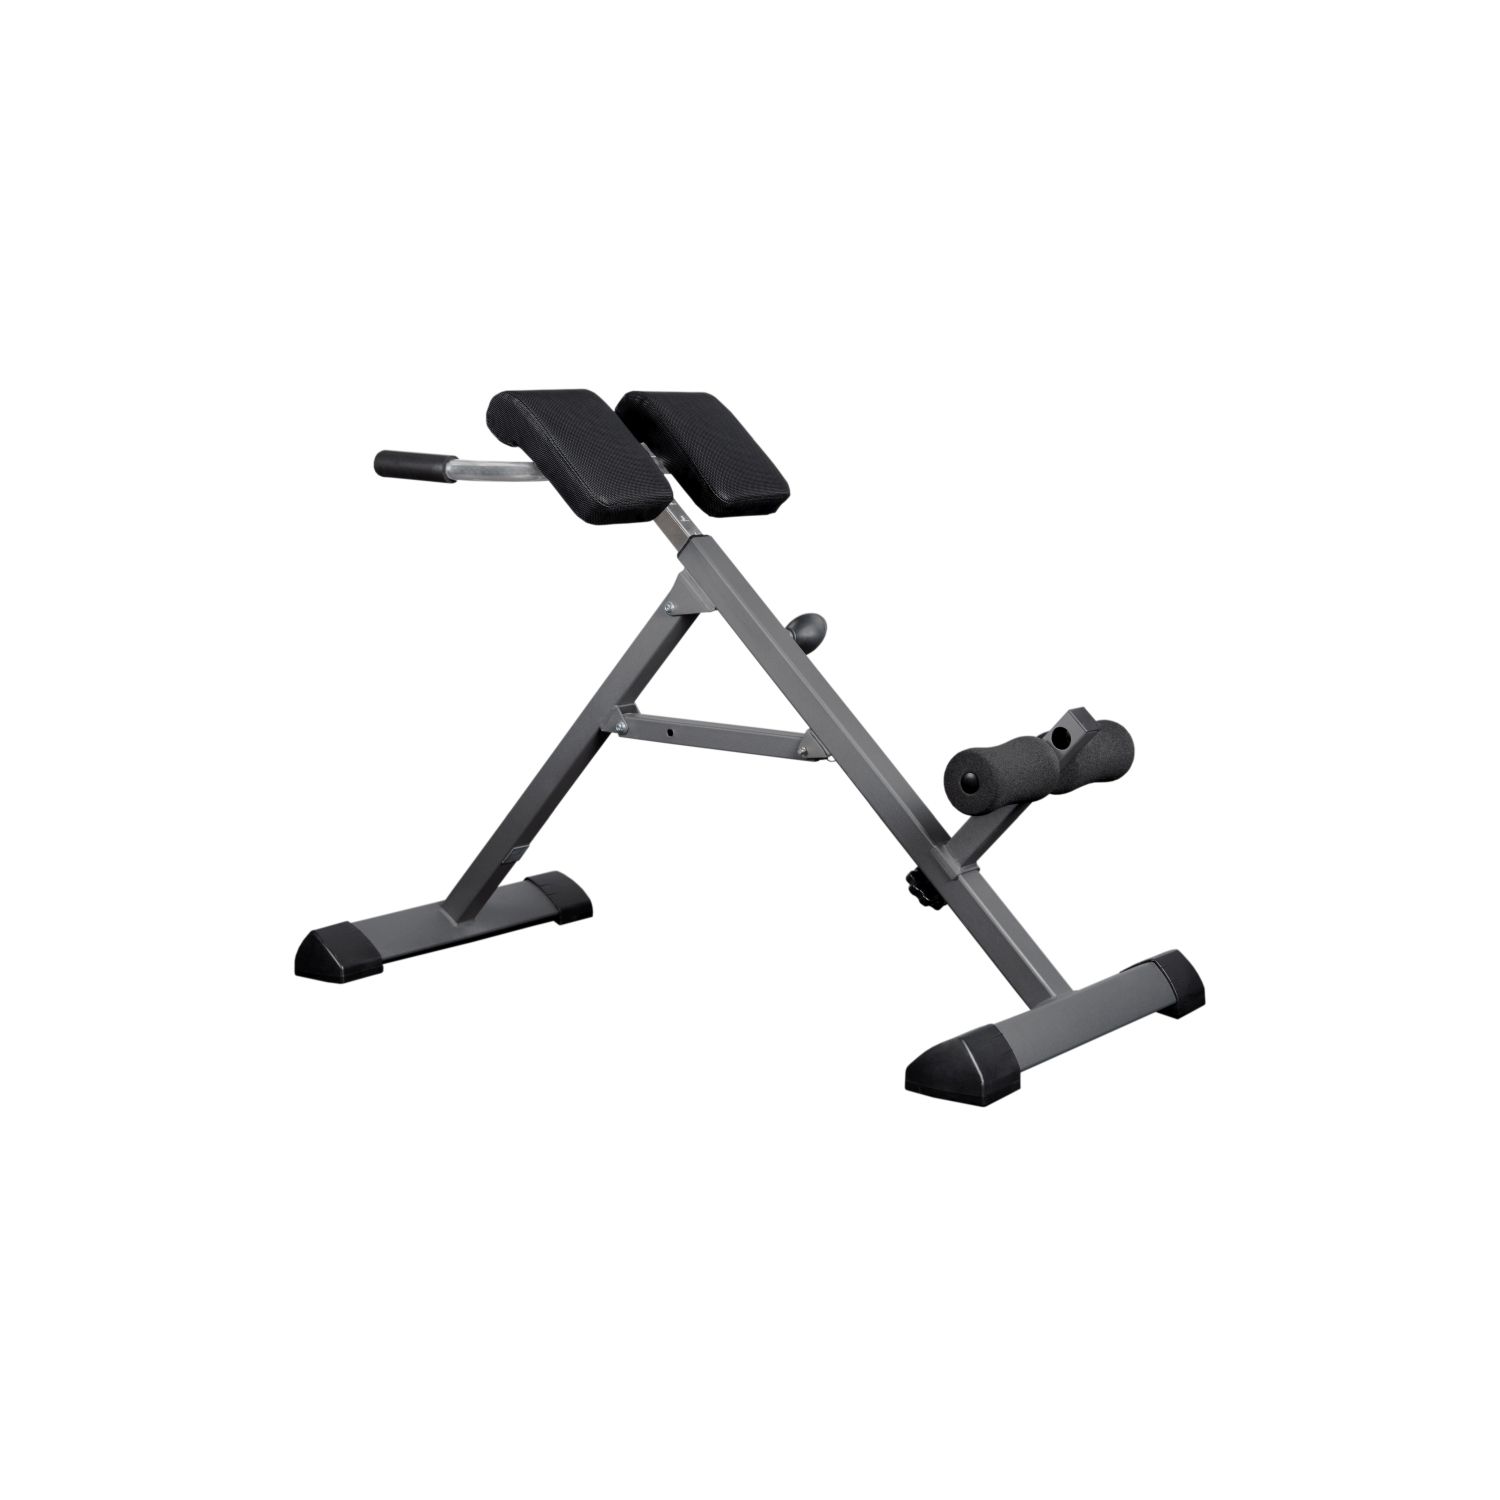 AB&BACK-TRAINER BANCO MUSCULACION FINNLO BY HAMMER 3869